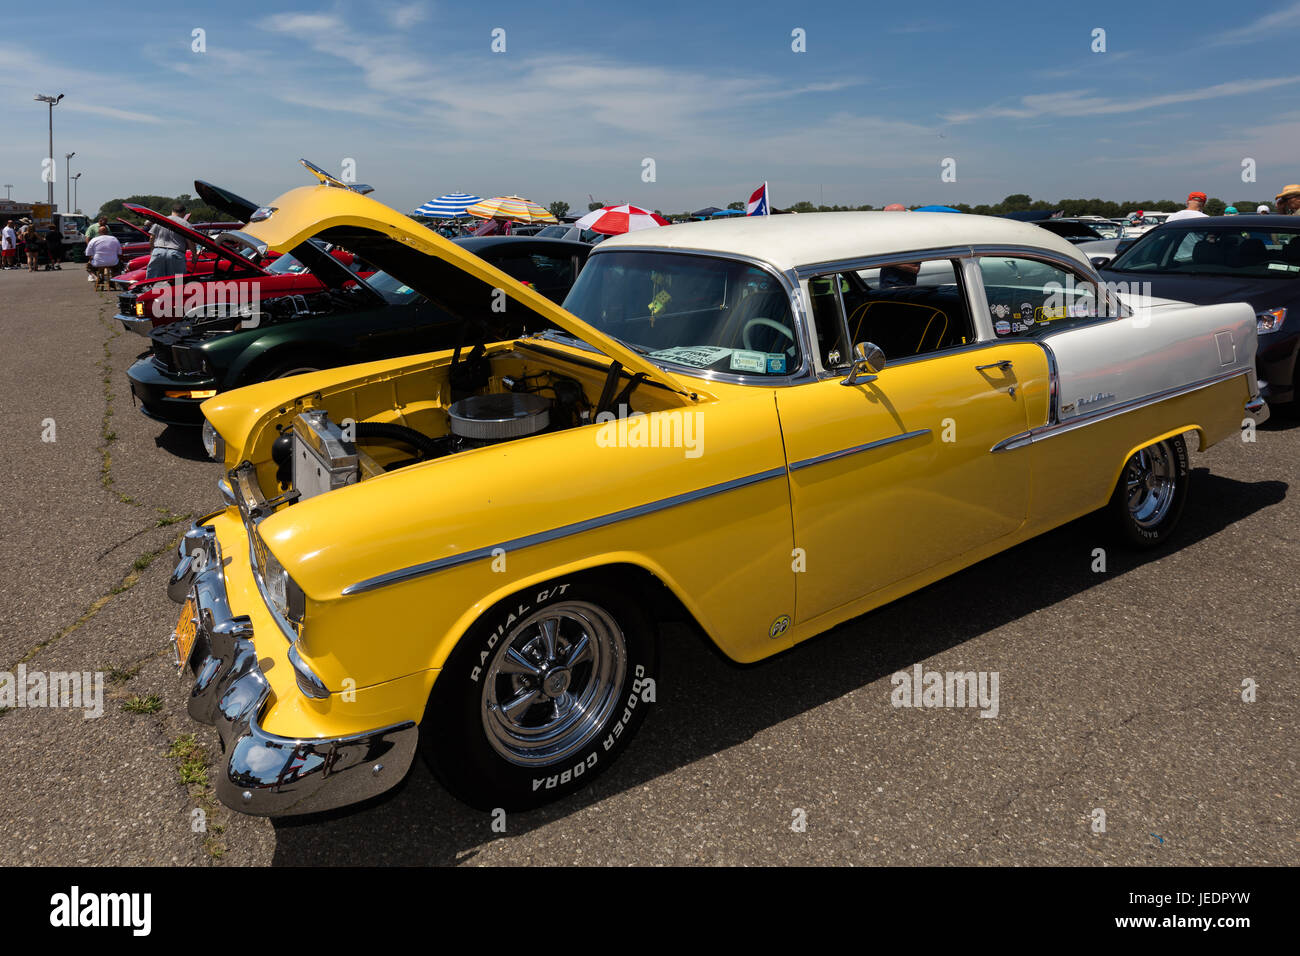 BROOKLYN, NEW YORK - JUNE 11 2017: A 1955 Chevrolet on display at the Antique Automobile Association of Brooklyn Annual Show at the Floyd Bennett Fiel Stock Photo